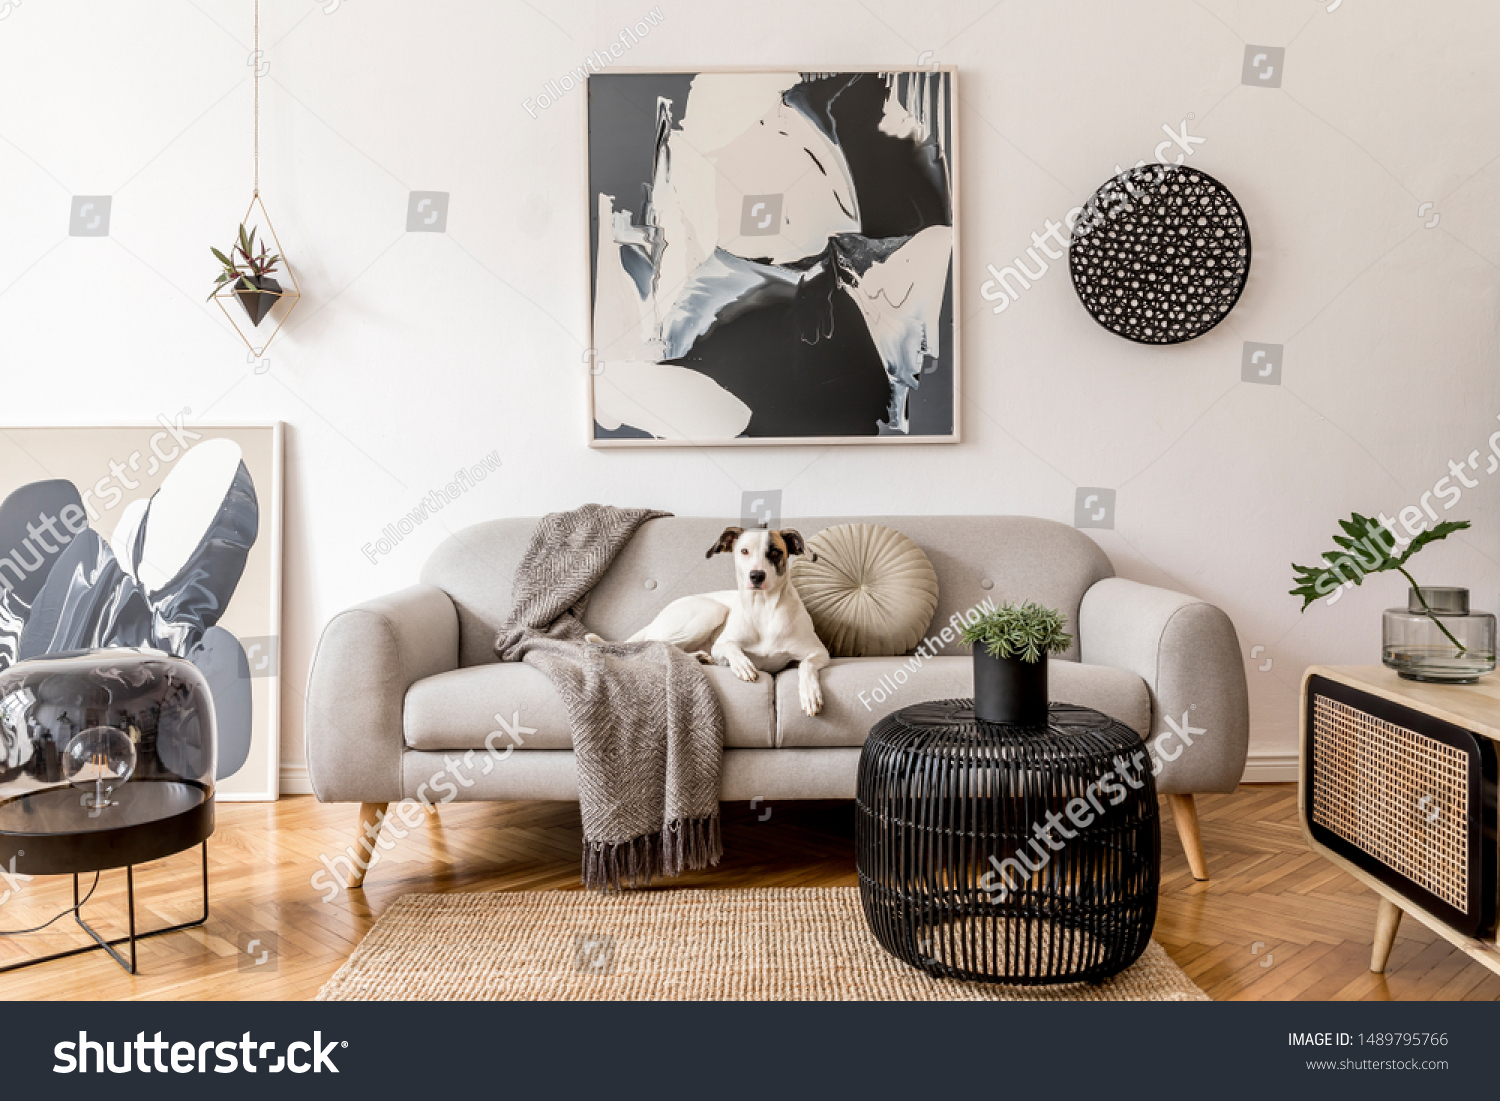 Stylish and scandinavian living room interior of modern apartment with gray sofa, design wooden commode, black table, lamp, abstract paintings on the wall. Beautiful dog lying on the couch. Home decor. #1489795766